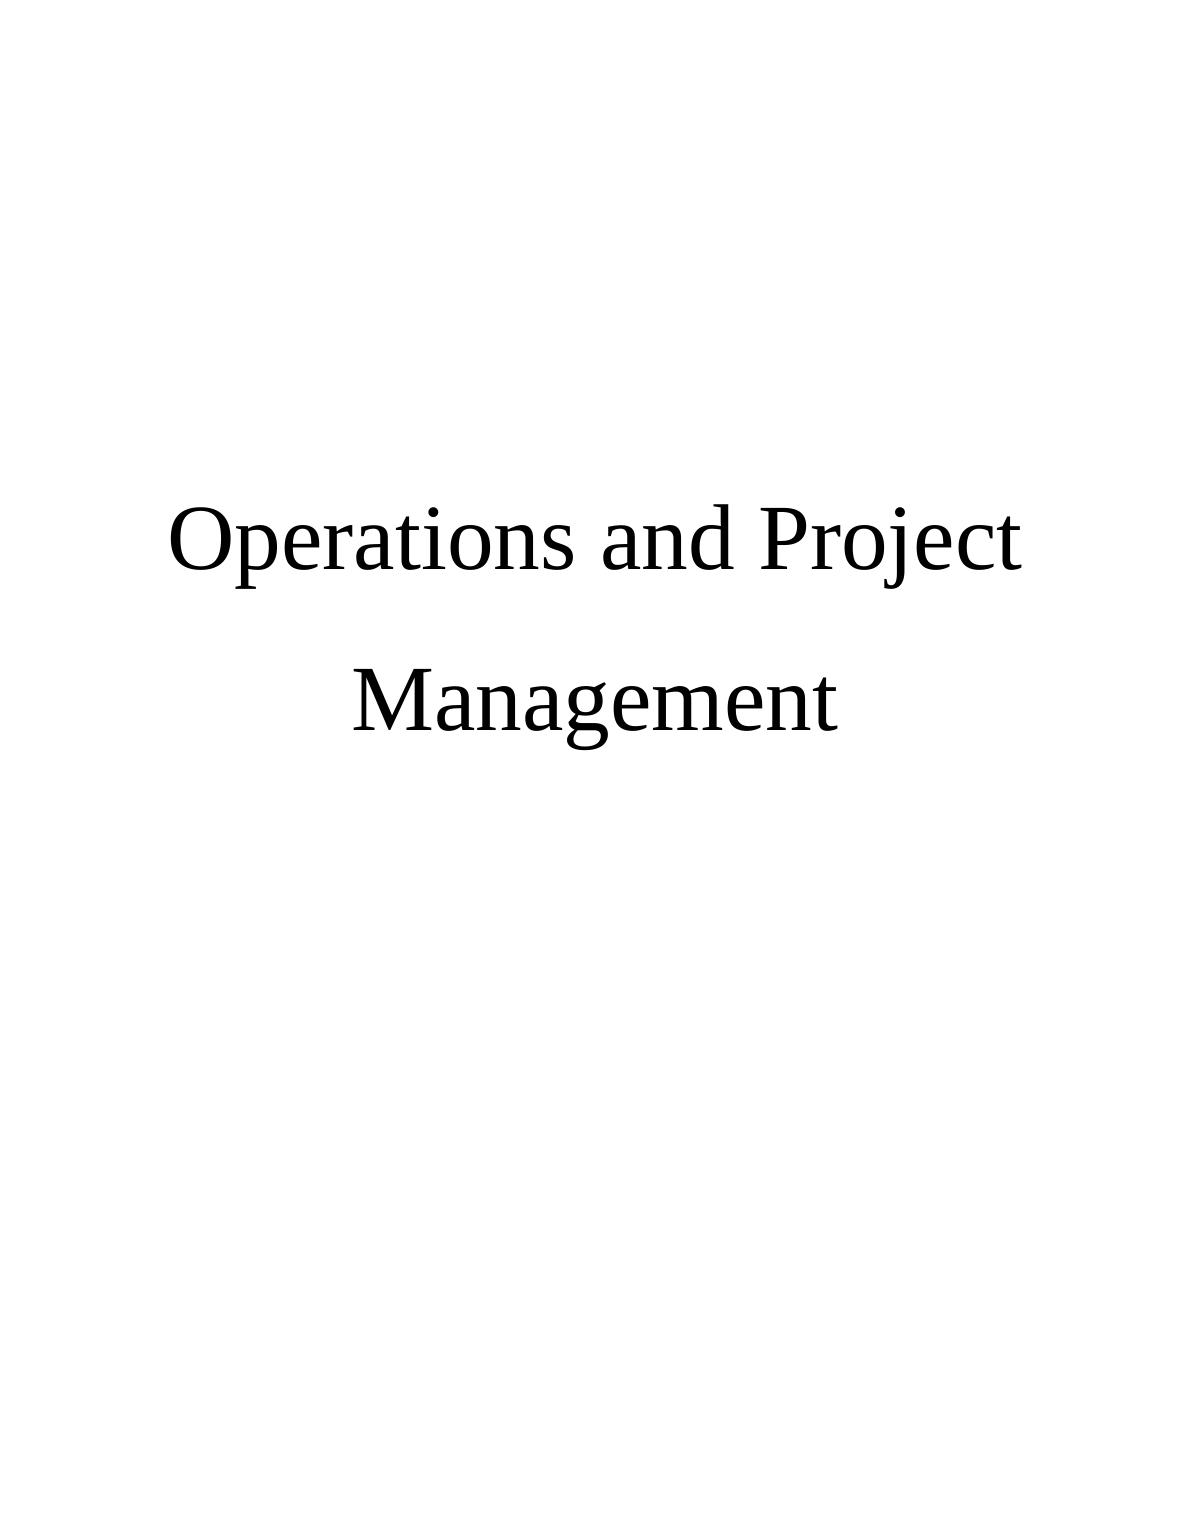 Operations and Project Management: Sample Assignment_1